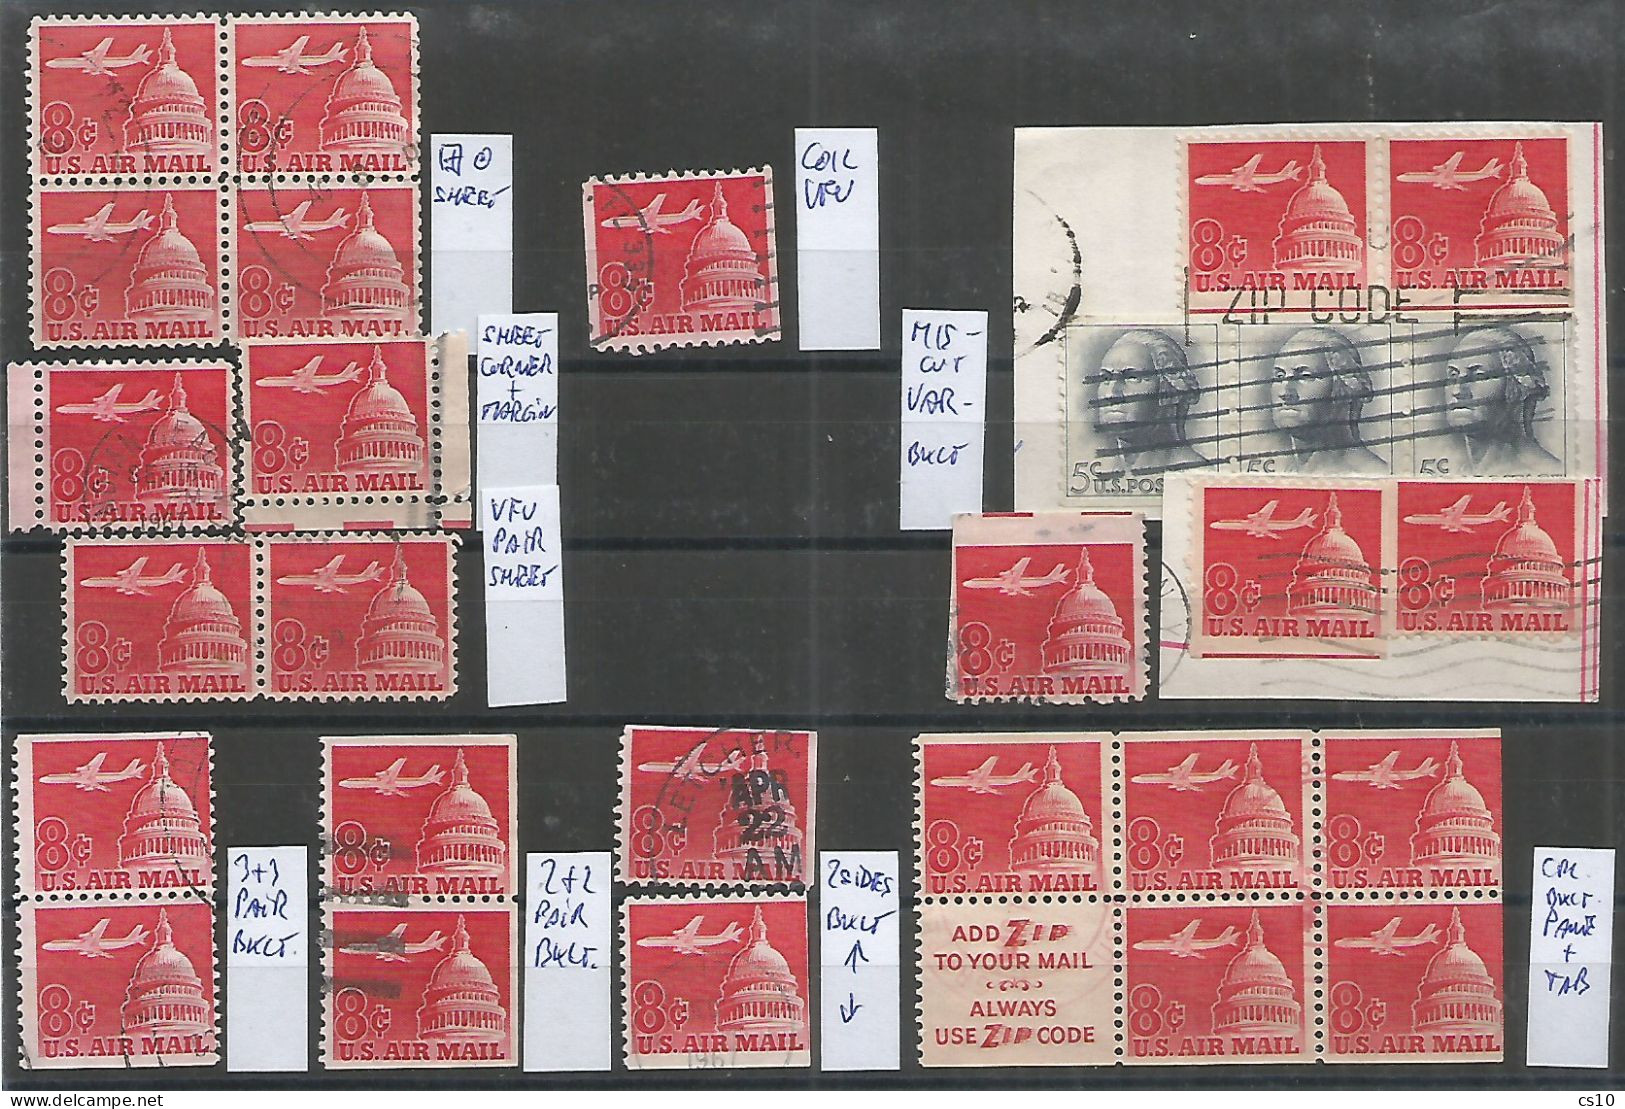 USA Airmail 1962 Jet & Capitol Dome SC# C64+65 Cpl Issue BL4 Sheet Coil Booklet Pane Pairs & Singles + Small Variety - 1941-80